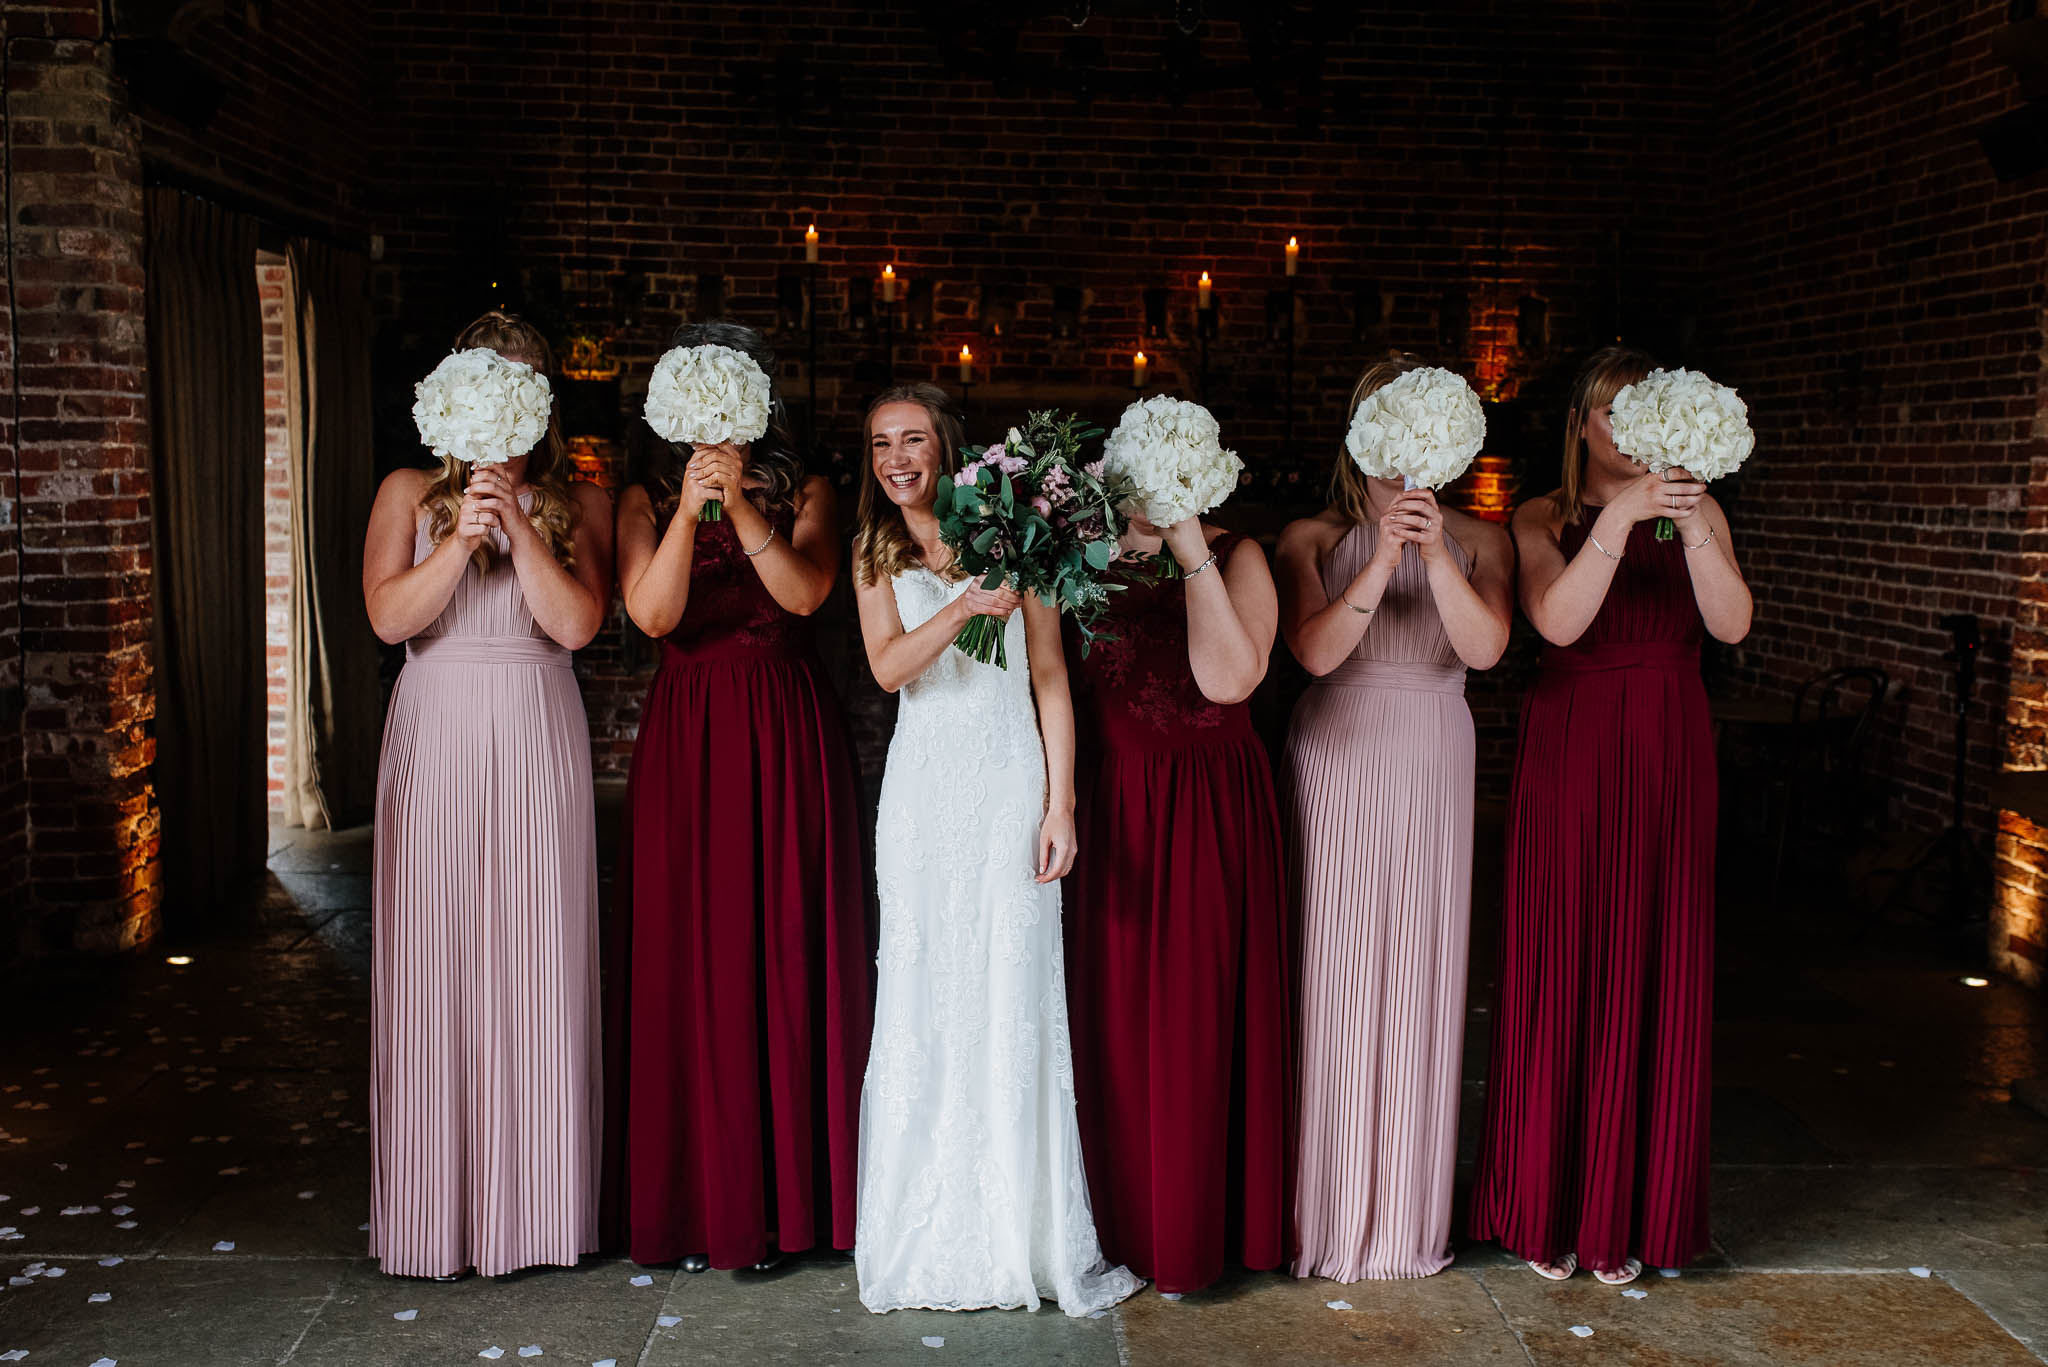 Bride having a lovely time with her bridesmaids during a photo shoot